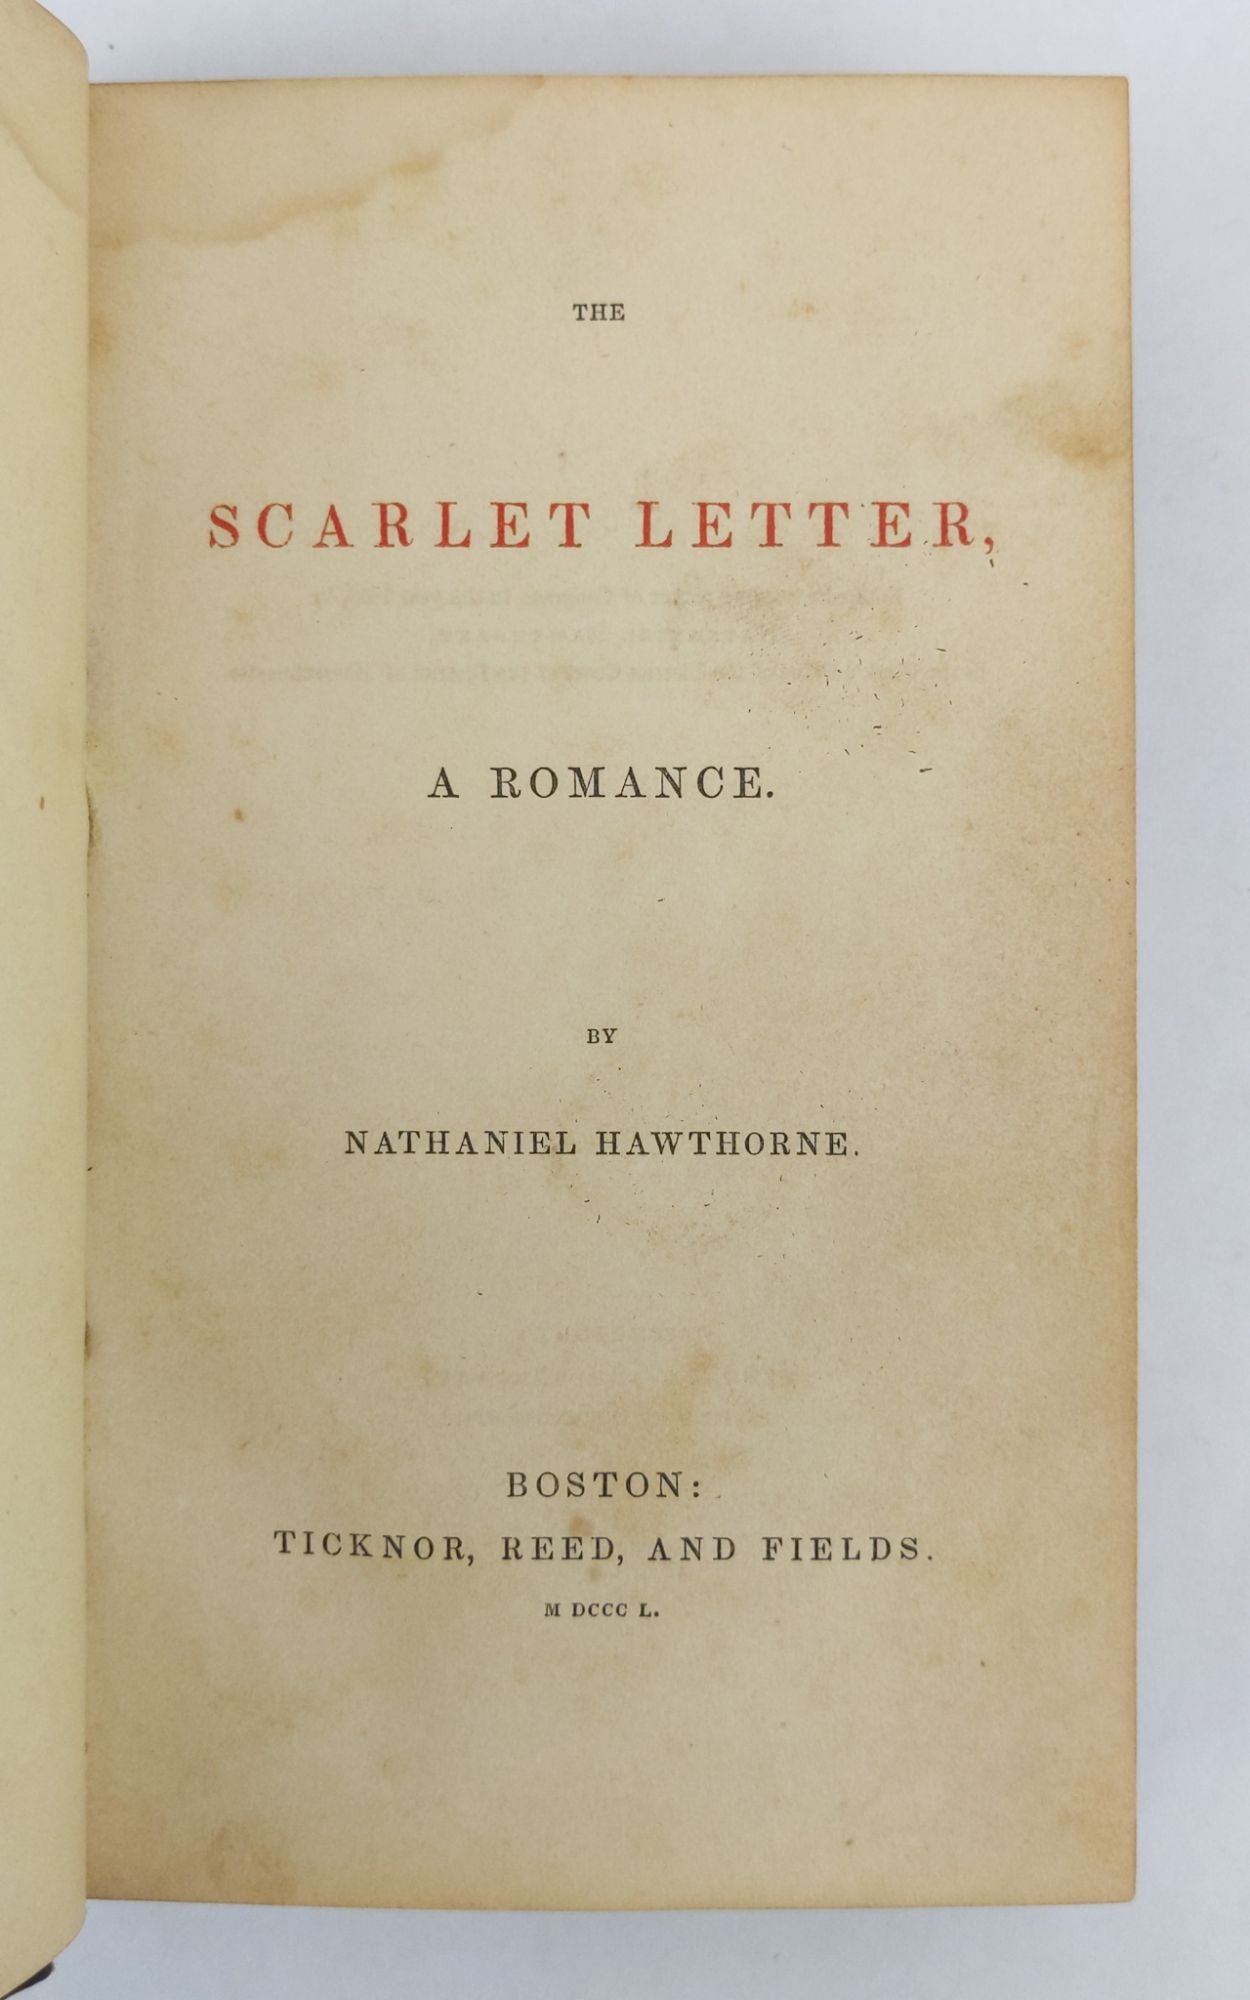 Product Image for THE SCARLET LETTER: A ROMANCE